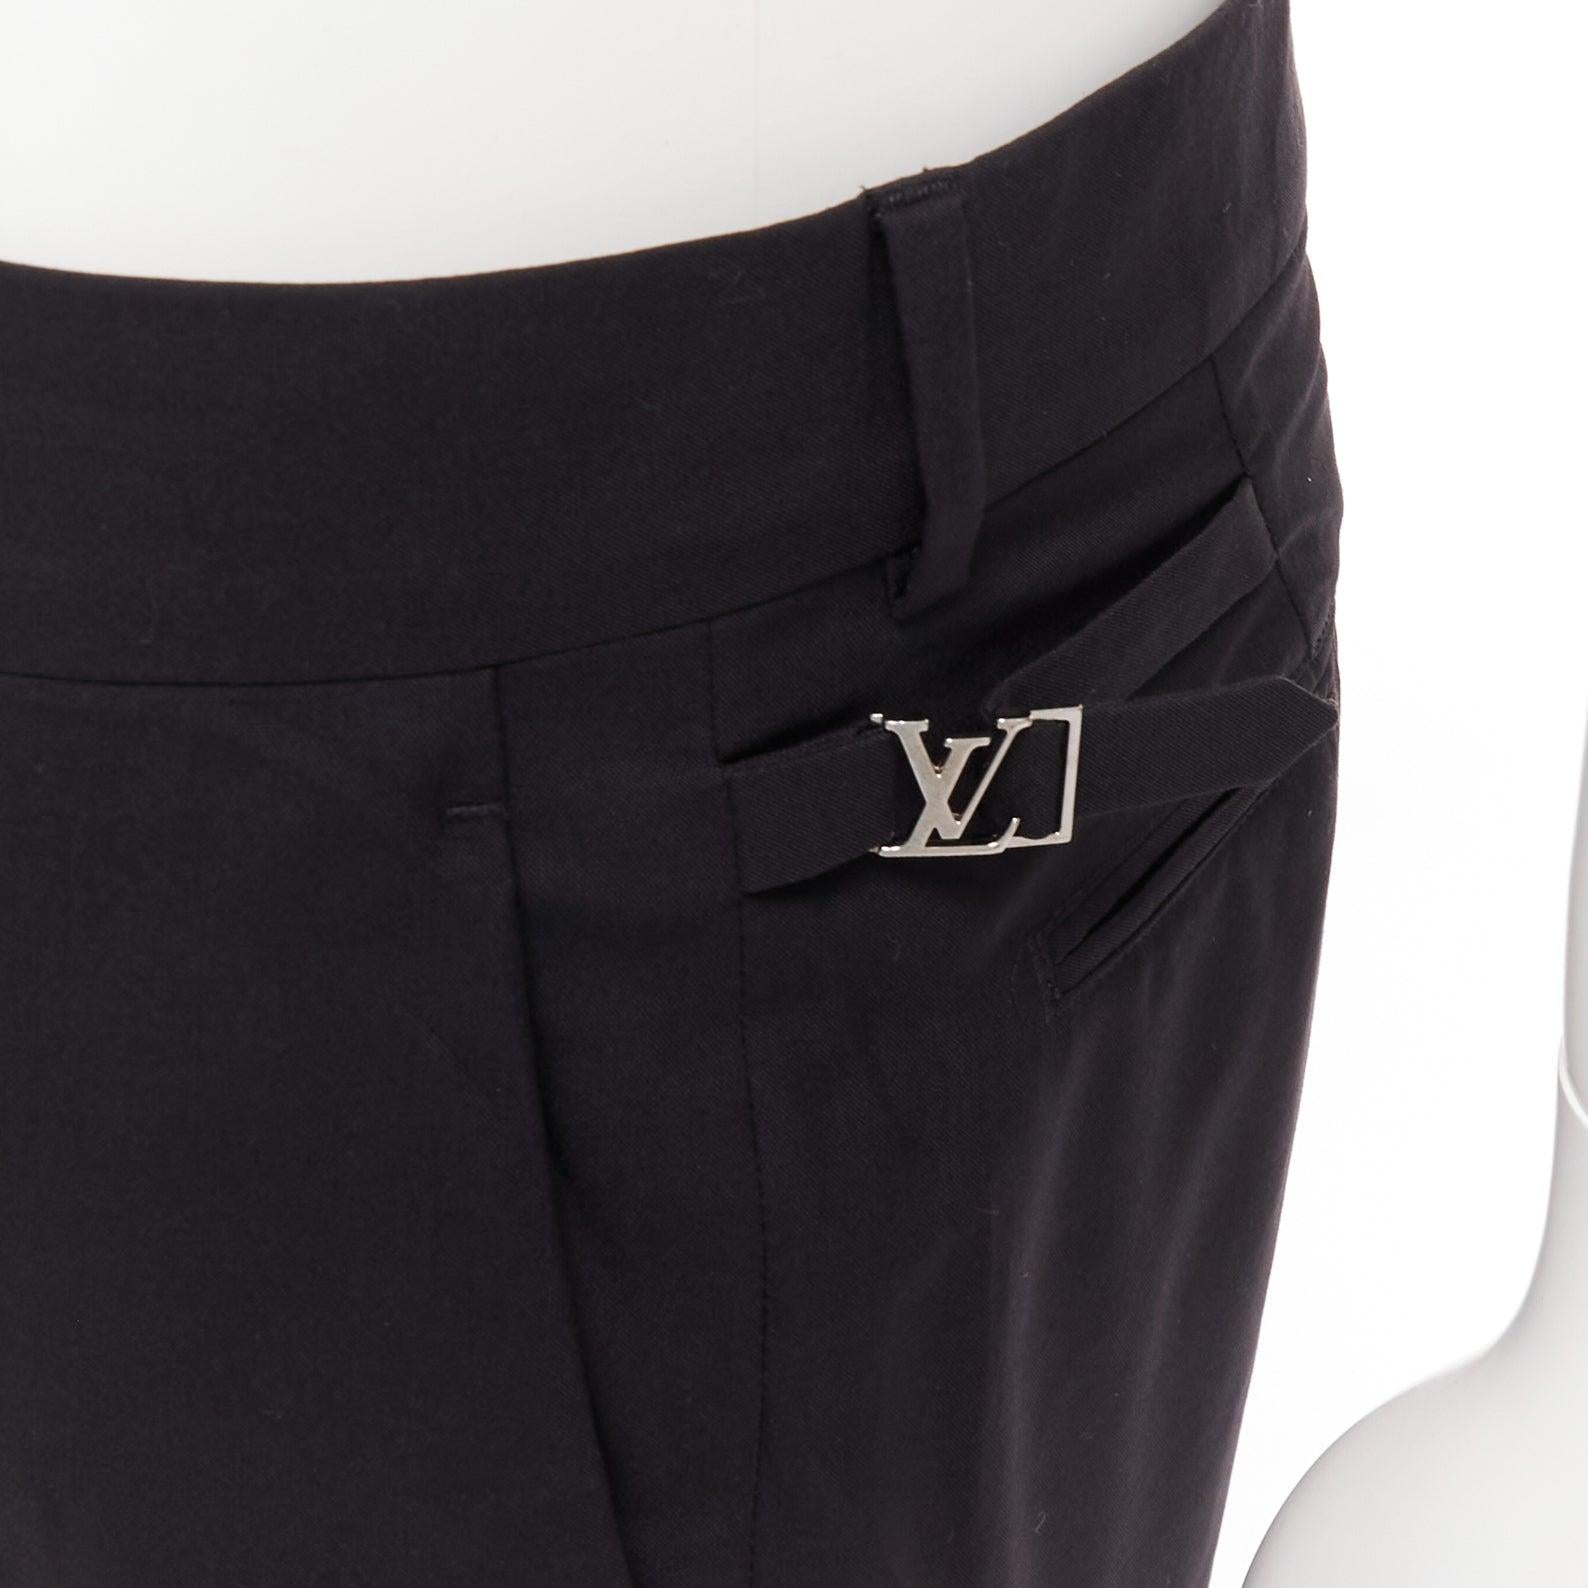 LOUIS VUITTON black 100% wool silver LV logo buckle sides cropped pants FR42 M
Reference: JSLE/A00139
Brand: Louis Vuitton
Material: Wool
Color: Black, Silver
Pattern: Solid
Closure: Zip Fly
Lining: Navy Fabric
Extra Details: LV silver logo buckles